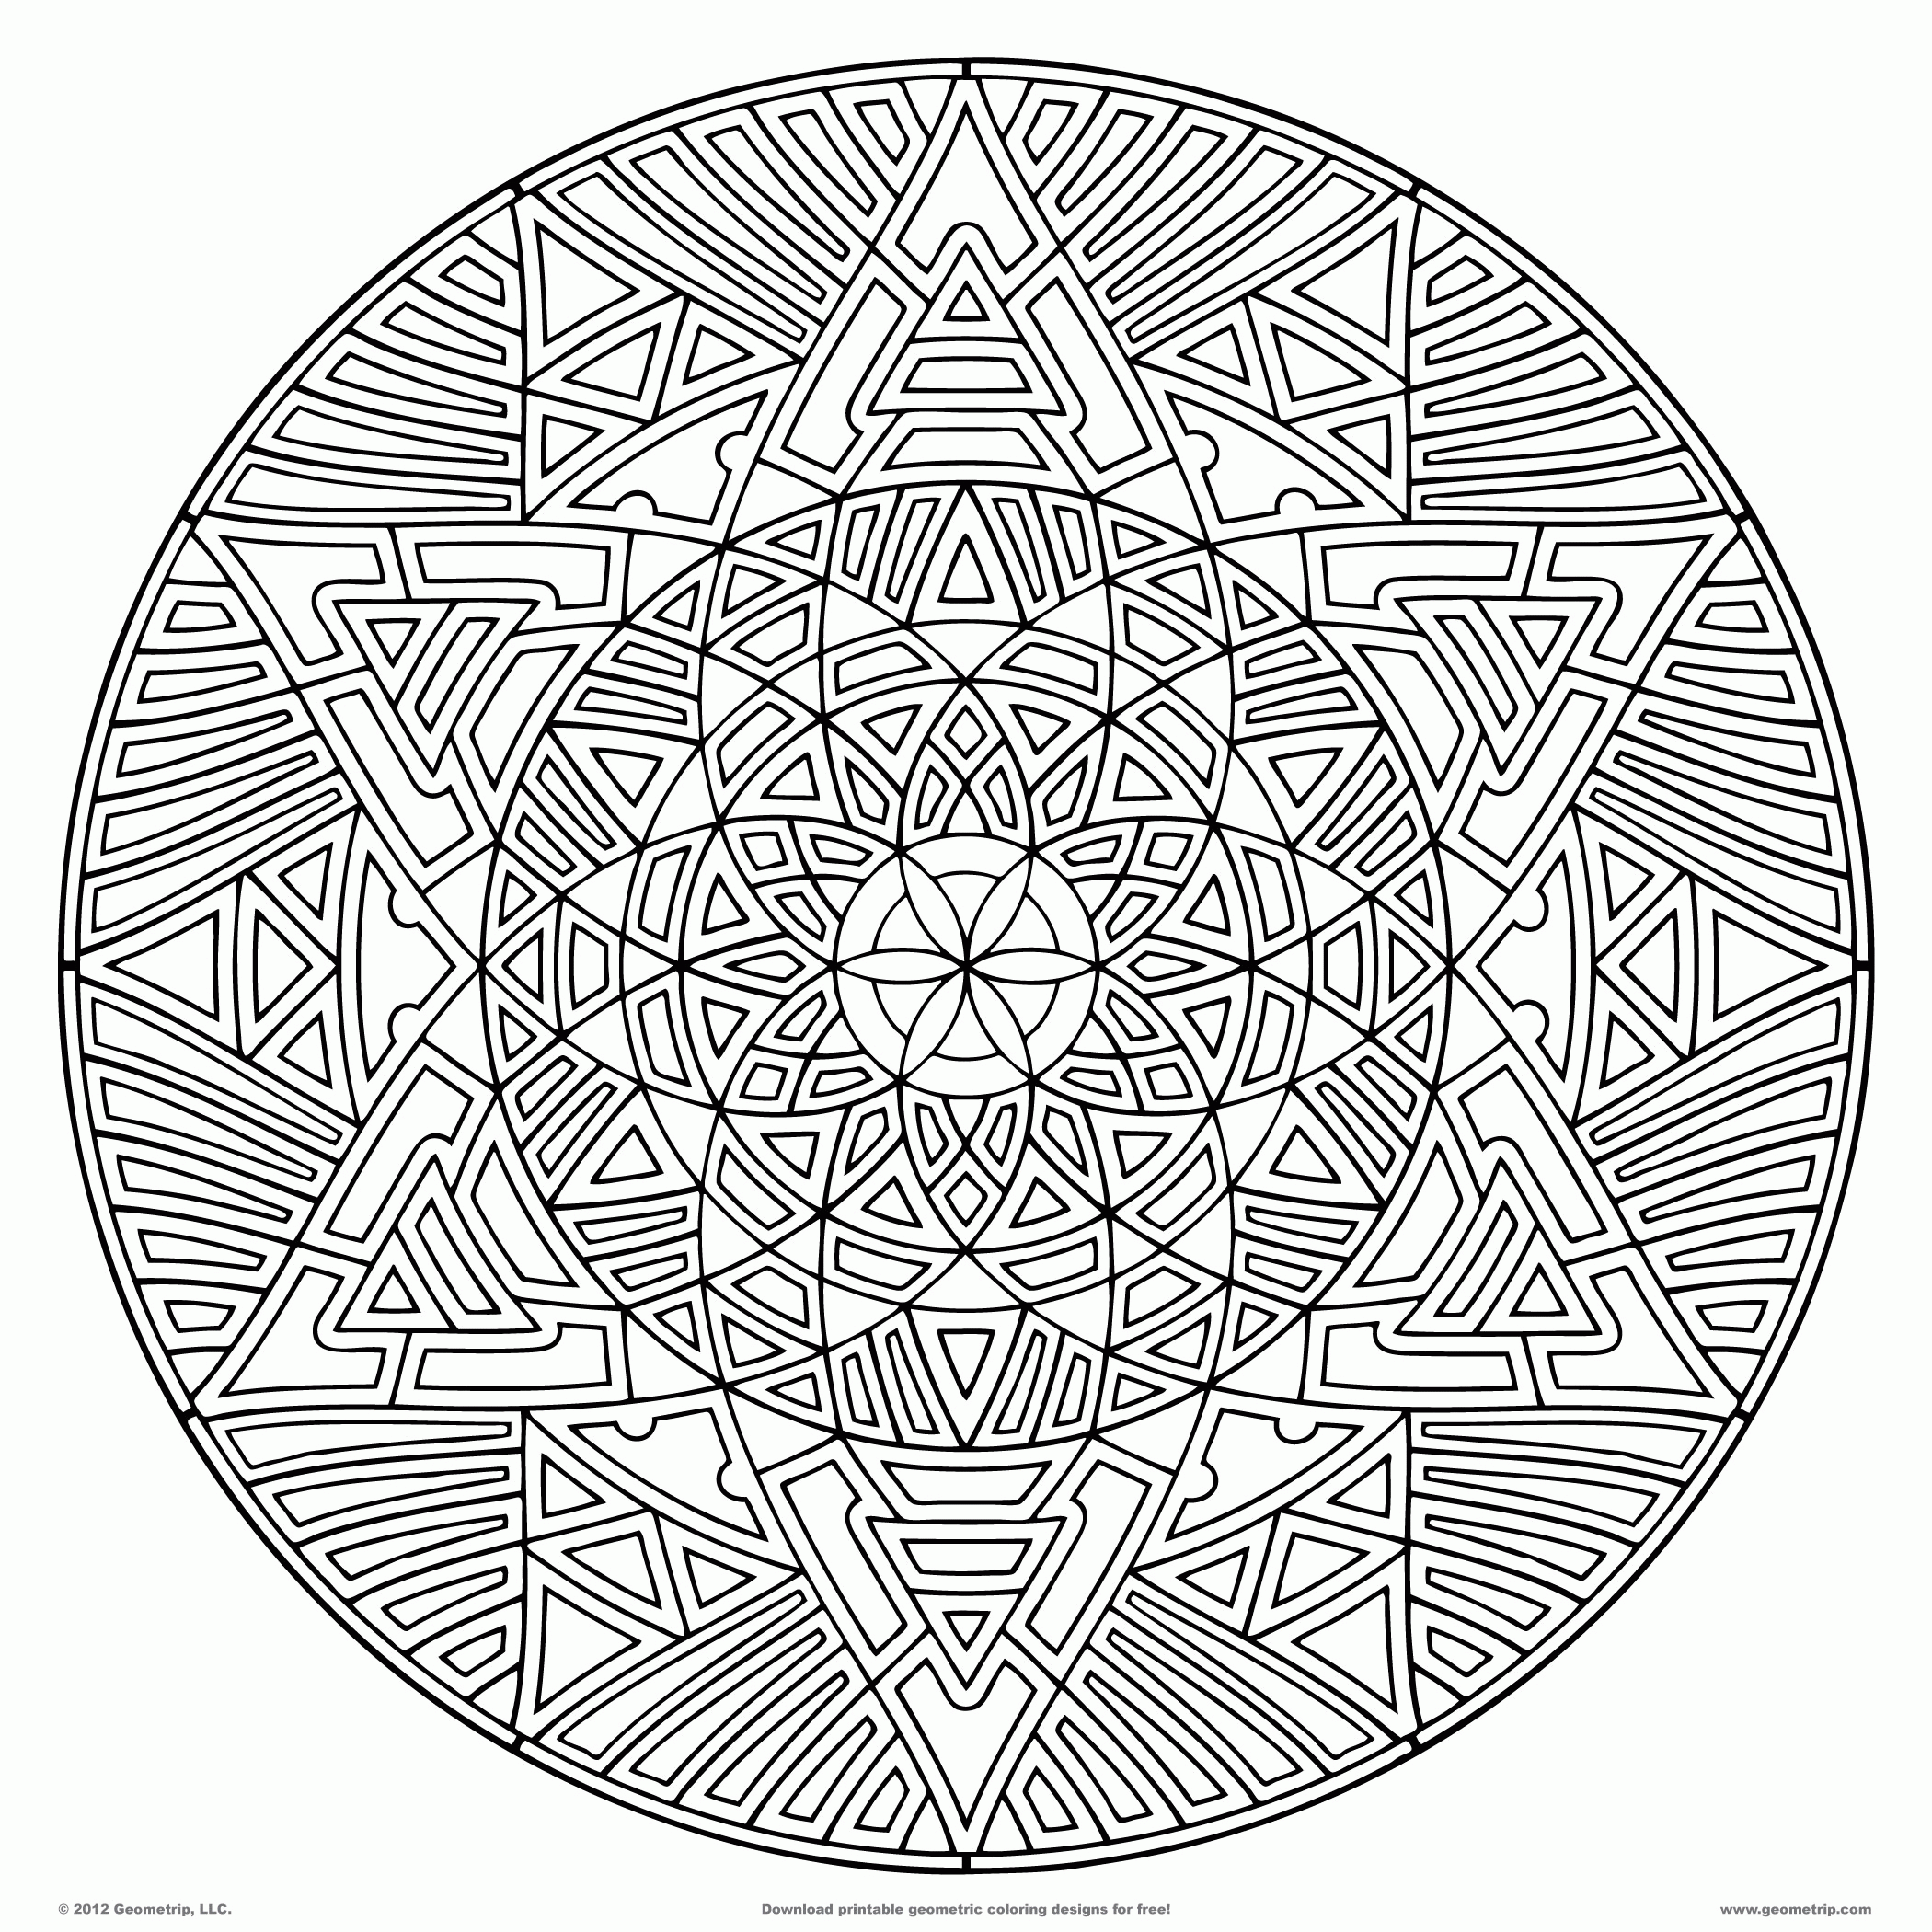 Geometric Shapes Coloring Pages #19 Geometric Pattern Coloring